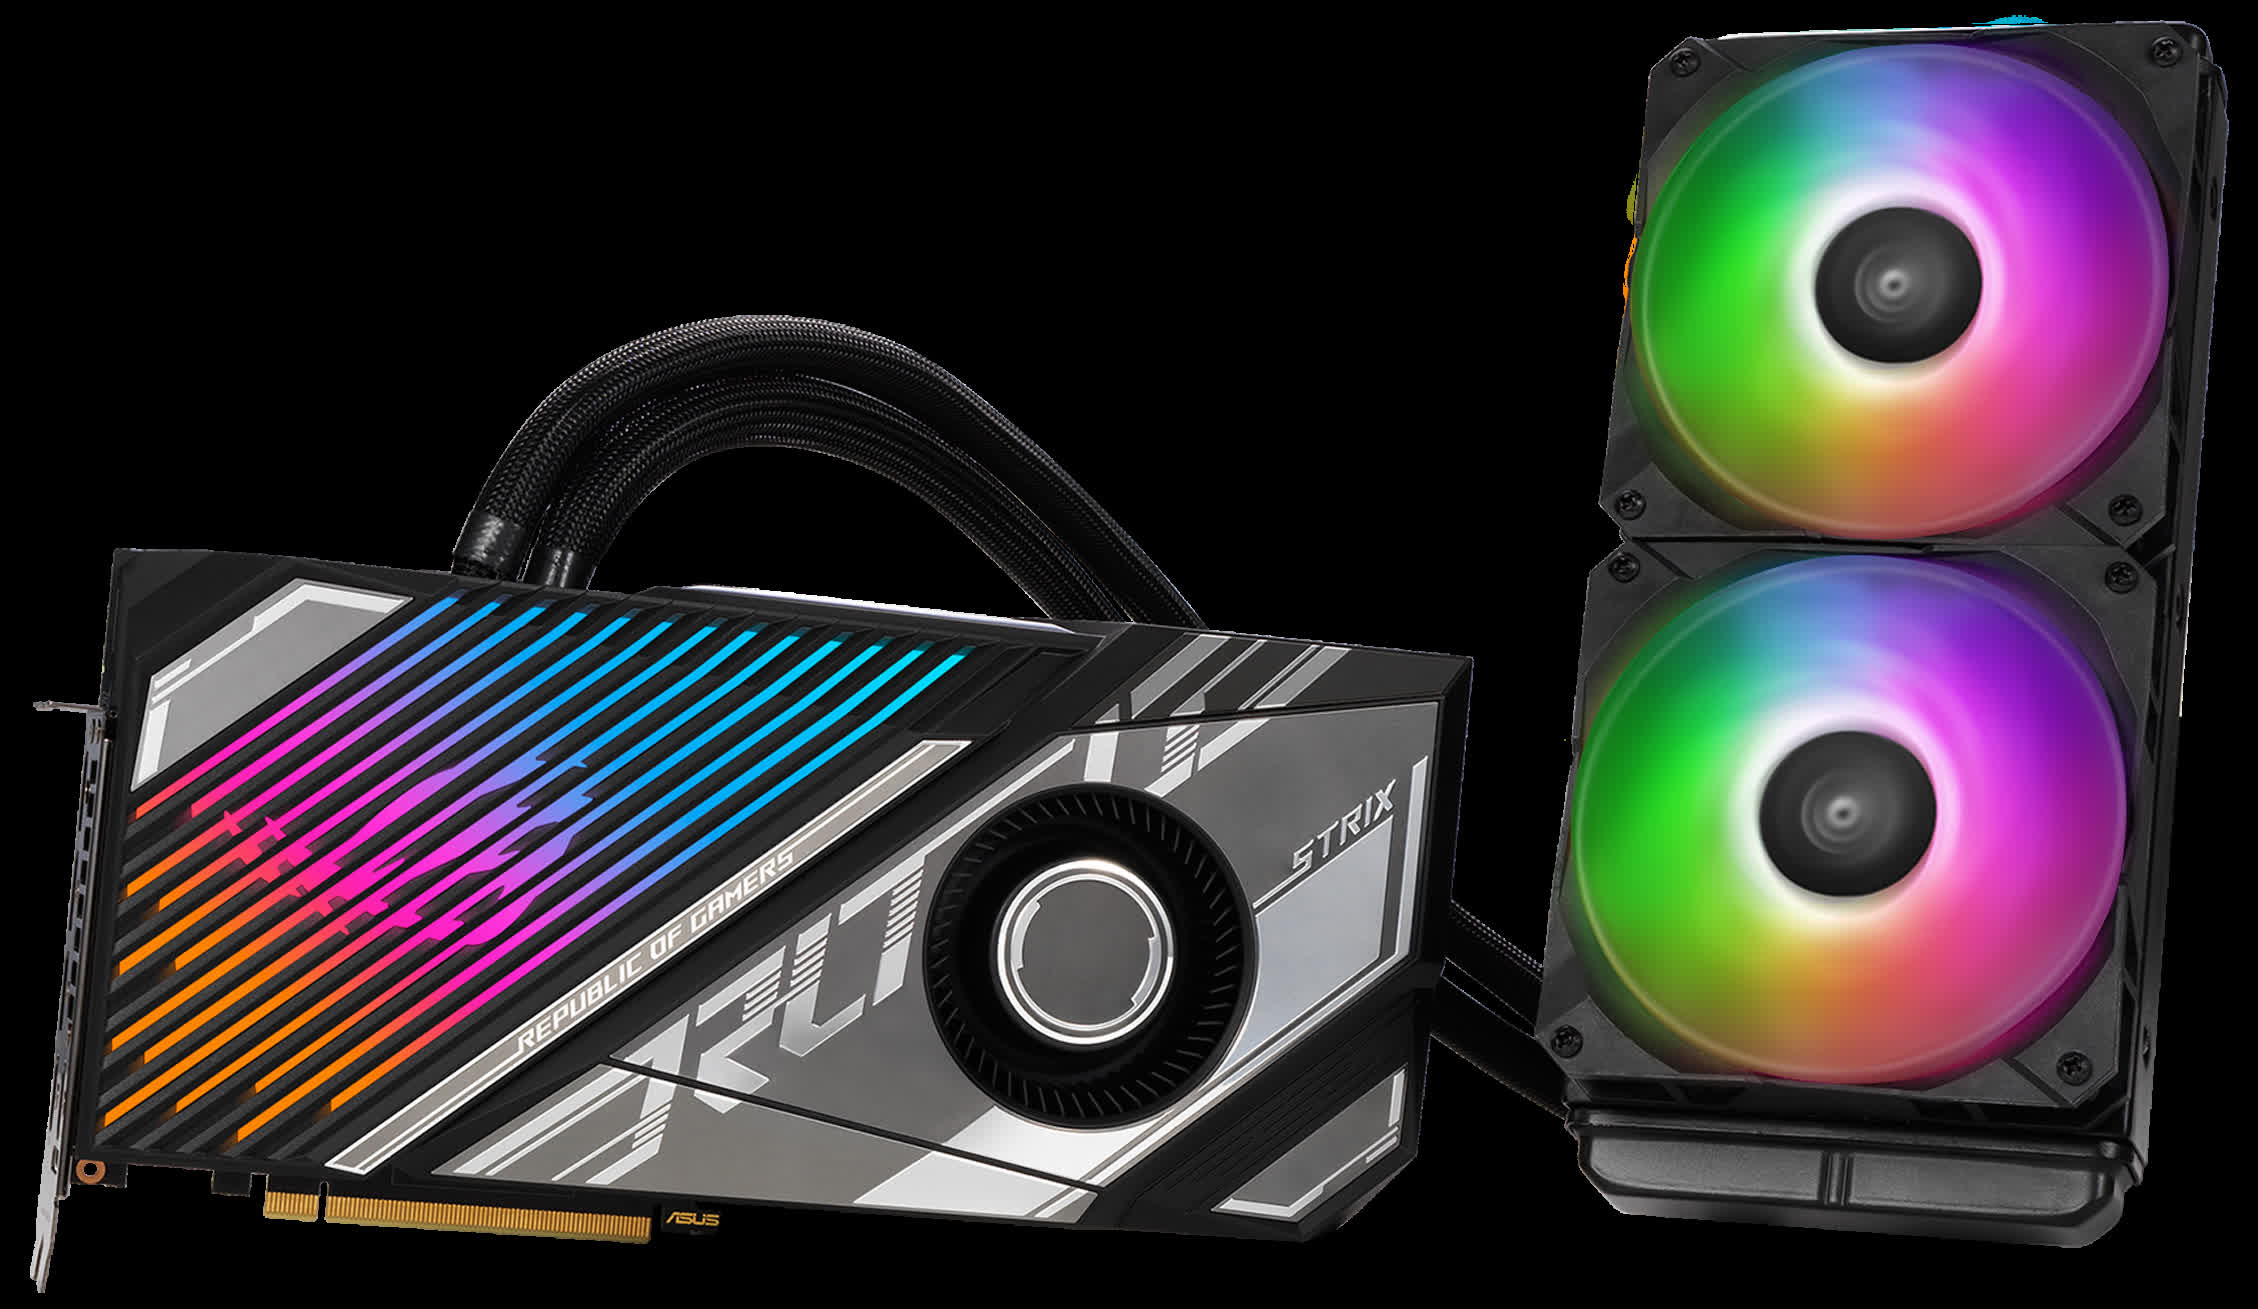 Asus announces a pair of GeForce RTX 4090 cards featuring compact designs